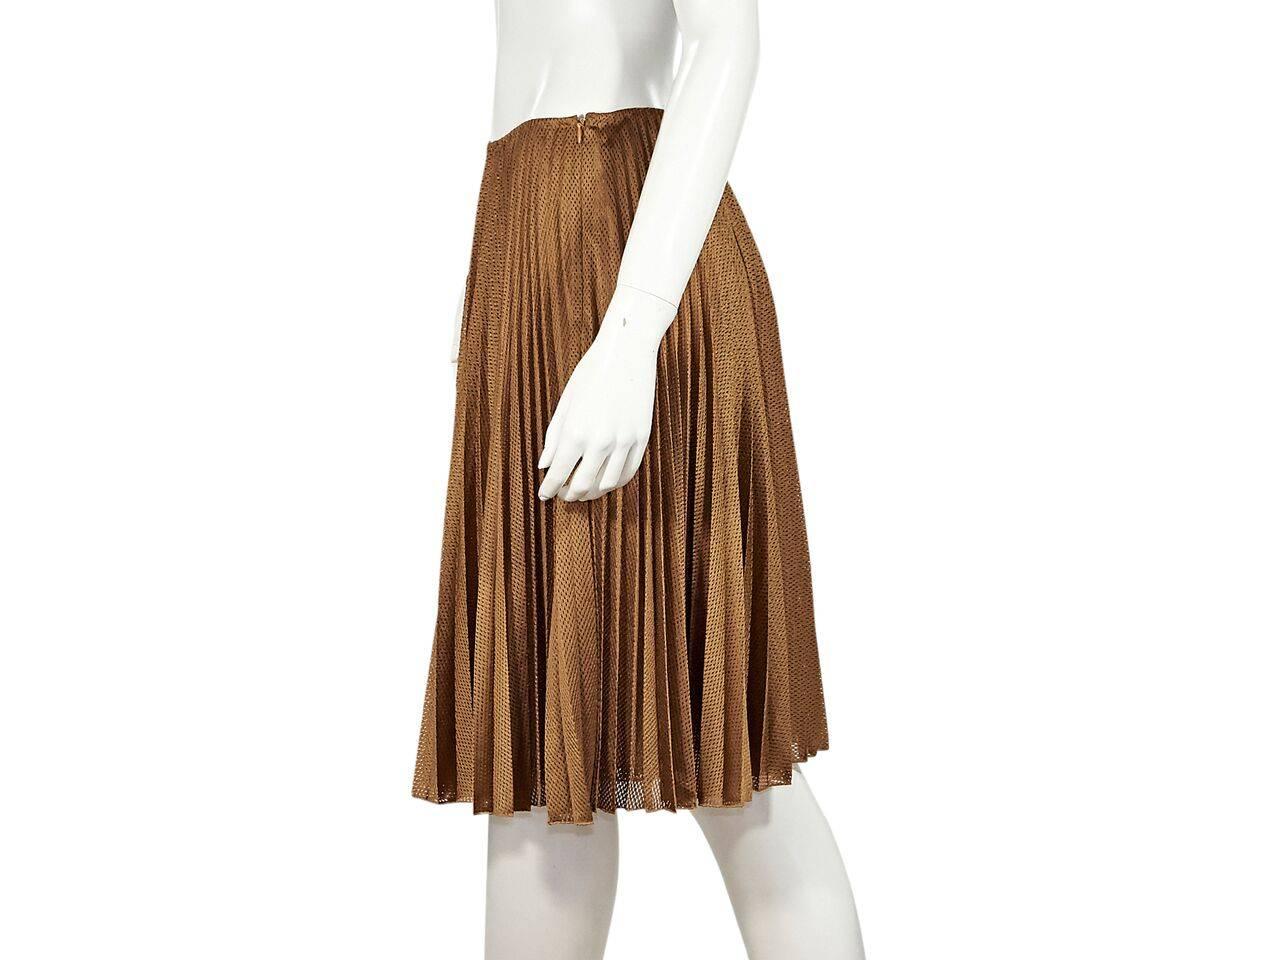 Product details:  Copper perforated nylon pleated skirt by Prada.  Concealed side zip closure. 
Condition: Pre-owned. Very good.
Est. Retail $ 498.00